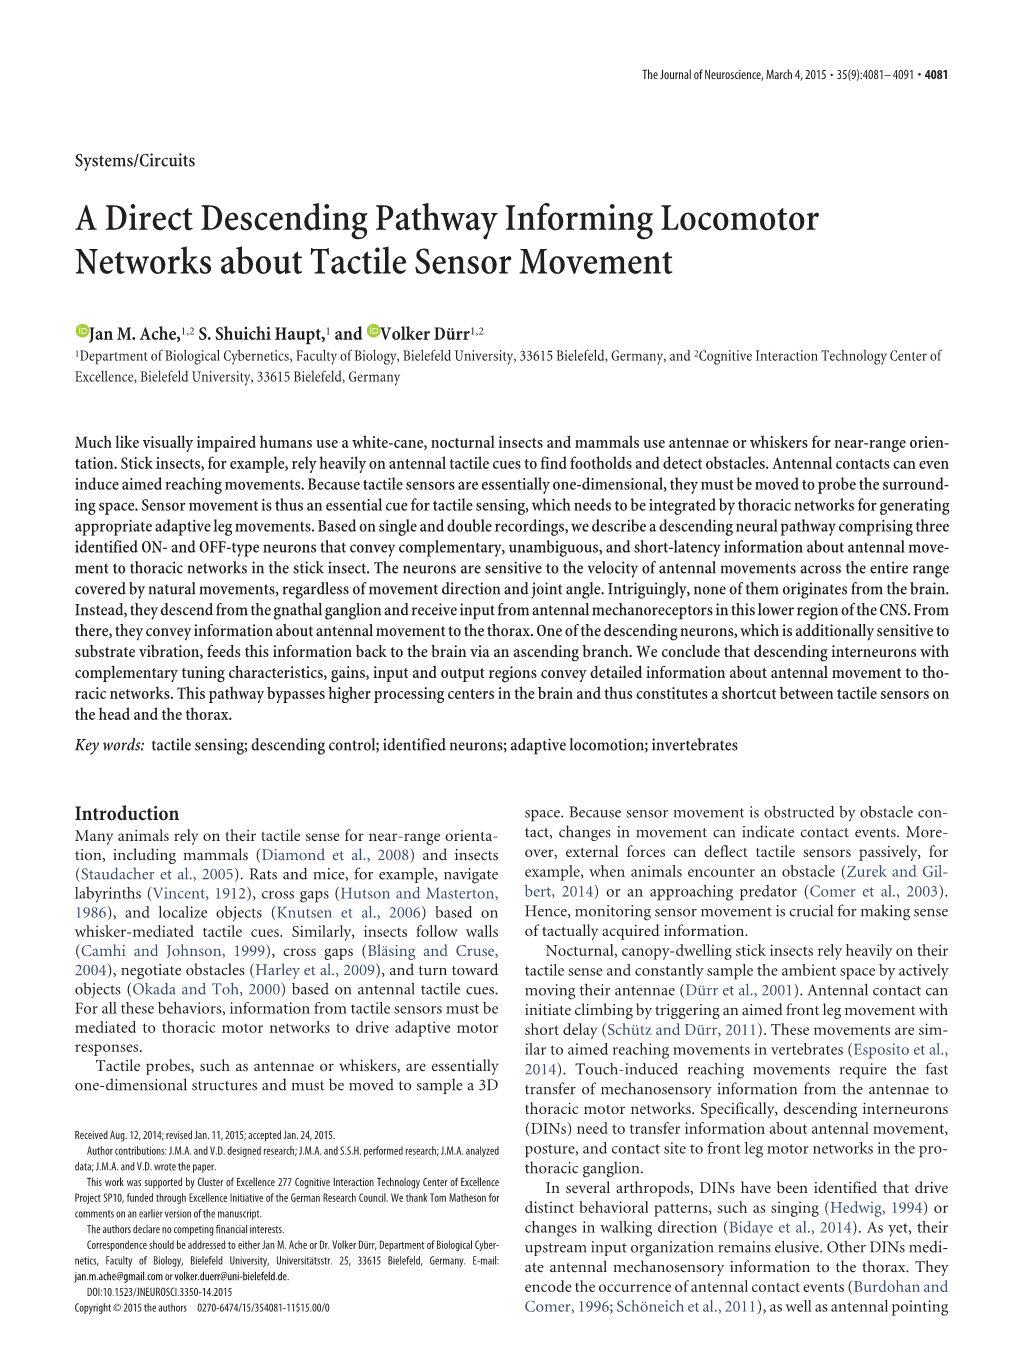 A Direct Descending Pathway Informing Locomotor Networks About Tactile Sensor Movement